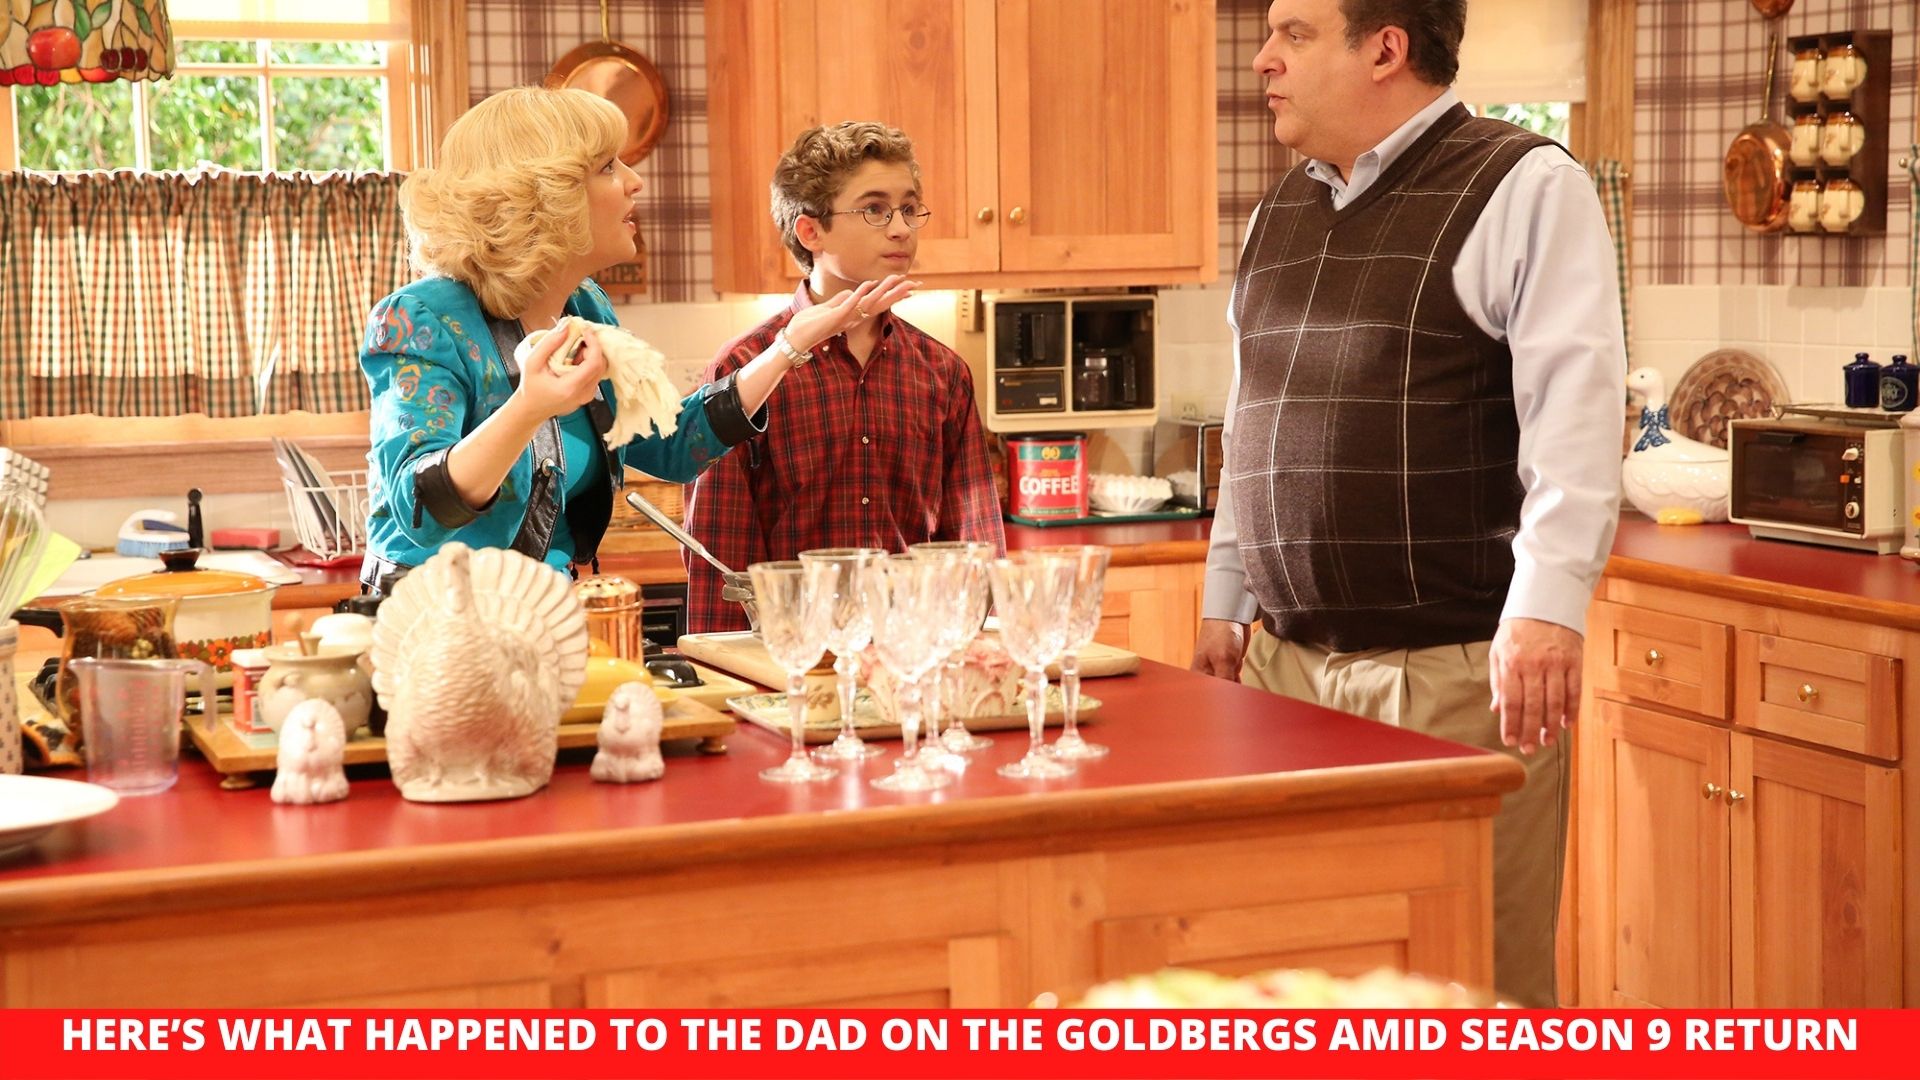 HERE’S WHAT HAPPENED TO THE DAD ON THE GOLDBERGS AMID SEASON 9 RETURN